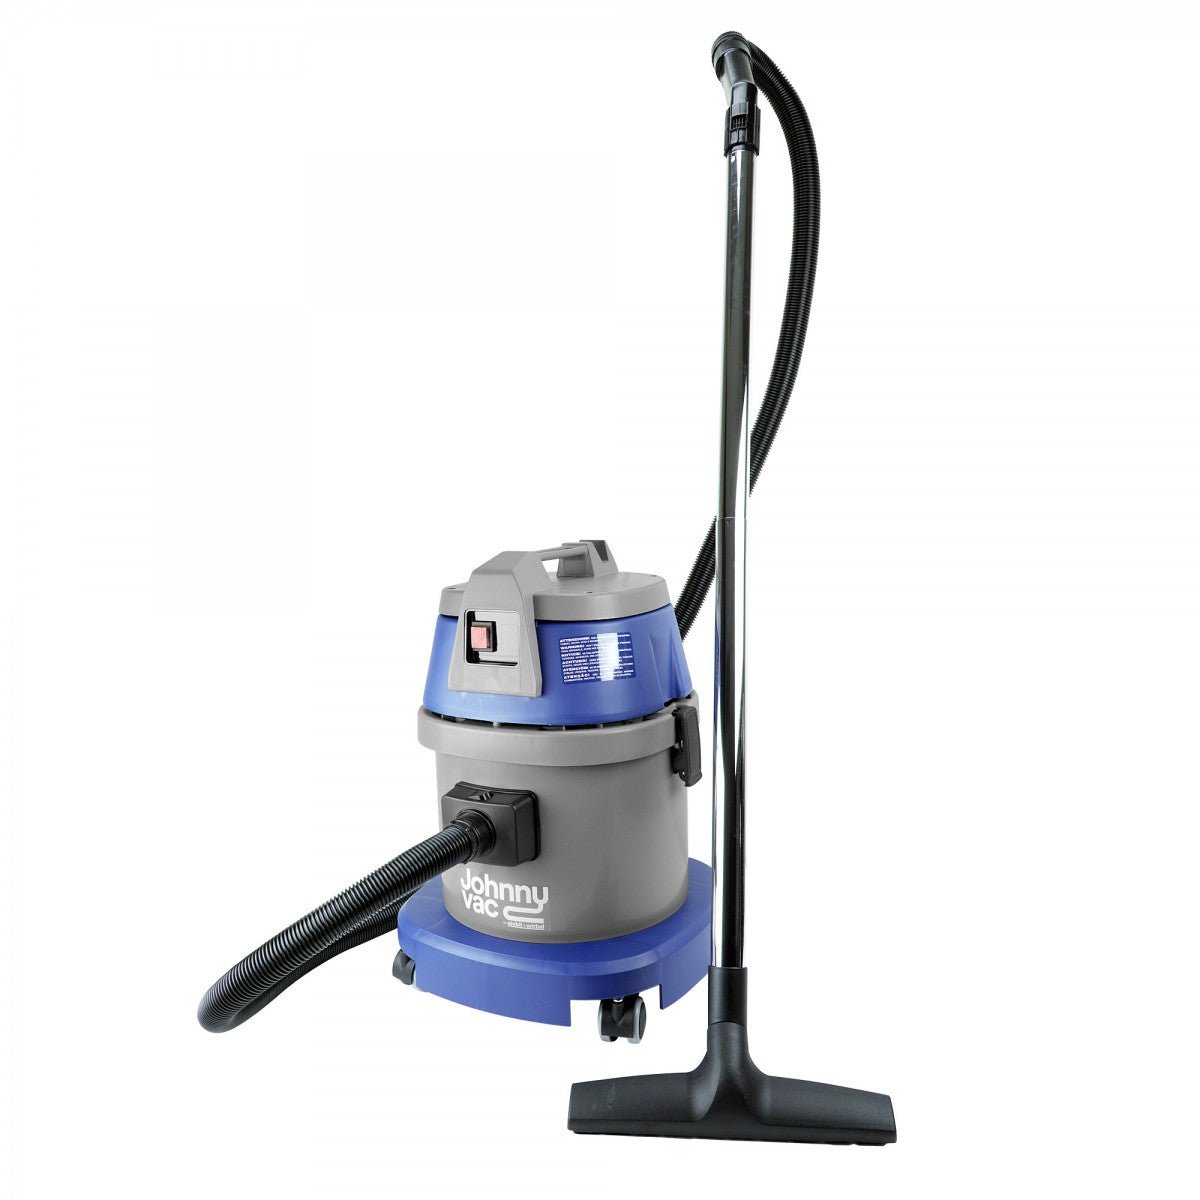 Ghibli/Johnny Vac JV10/AS10 4 Gal Commercial Wet/Dry Canister Vacuum - Wet & Dry Vacuums